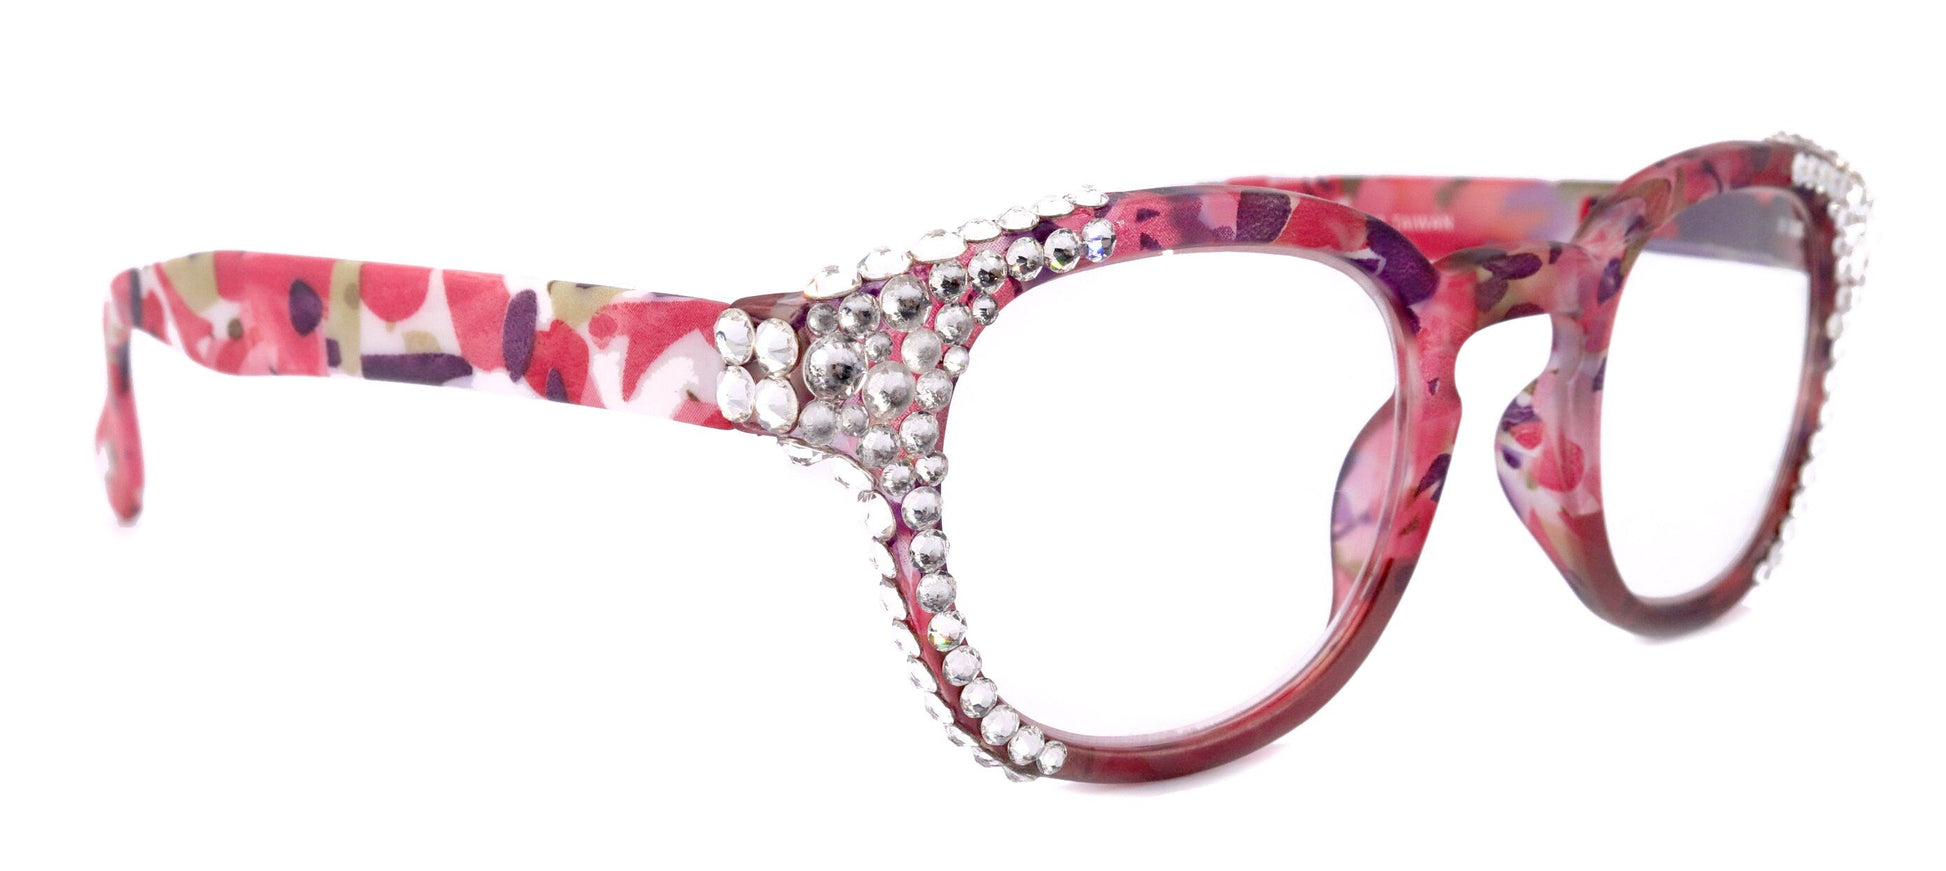 Autumn, (Bling) Reading Glasses For Women Adorned w (Clear) Genuine European Crystals,  Round Frame (Pink, Purple Floral) NY Fifth Avenue 